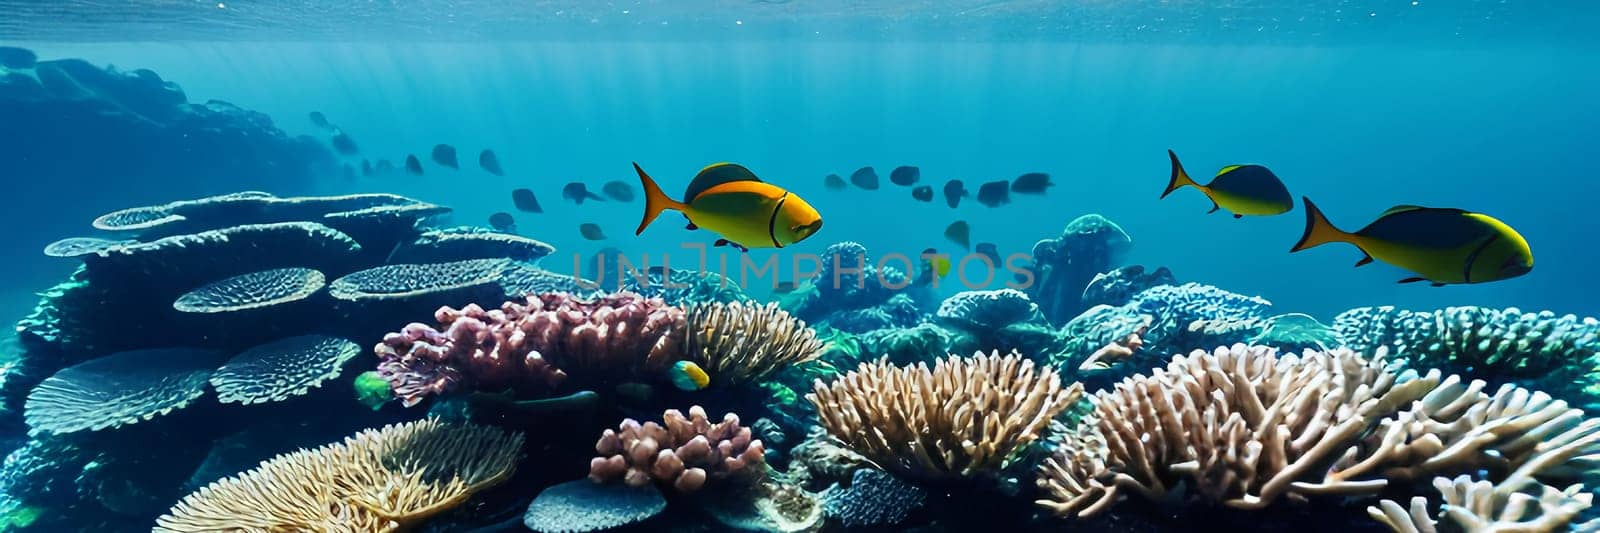 Underwater coral reef landscape with colorful fish. by Annu1tochka